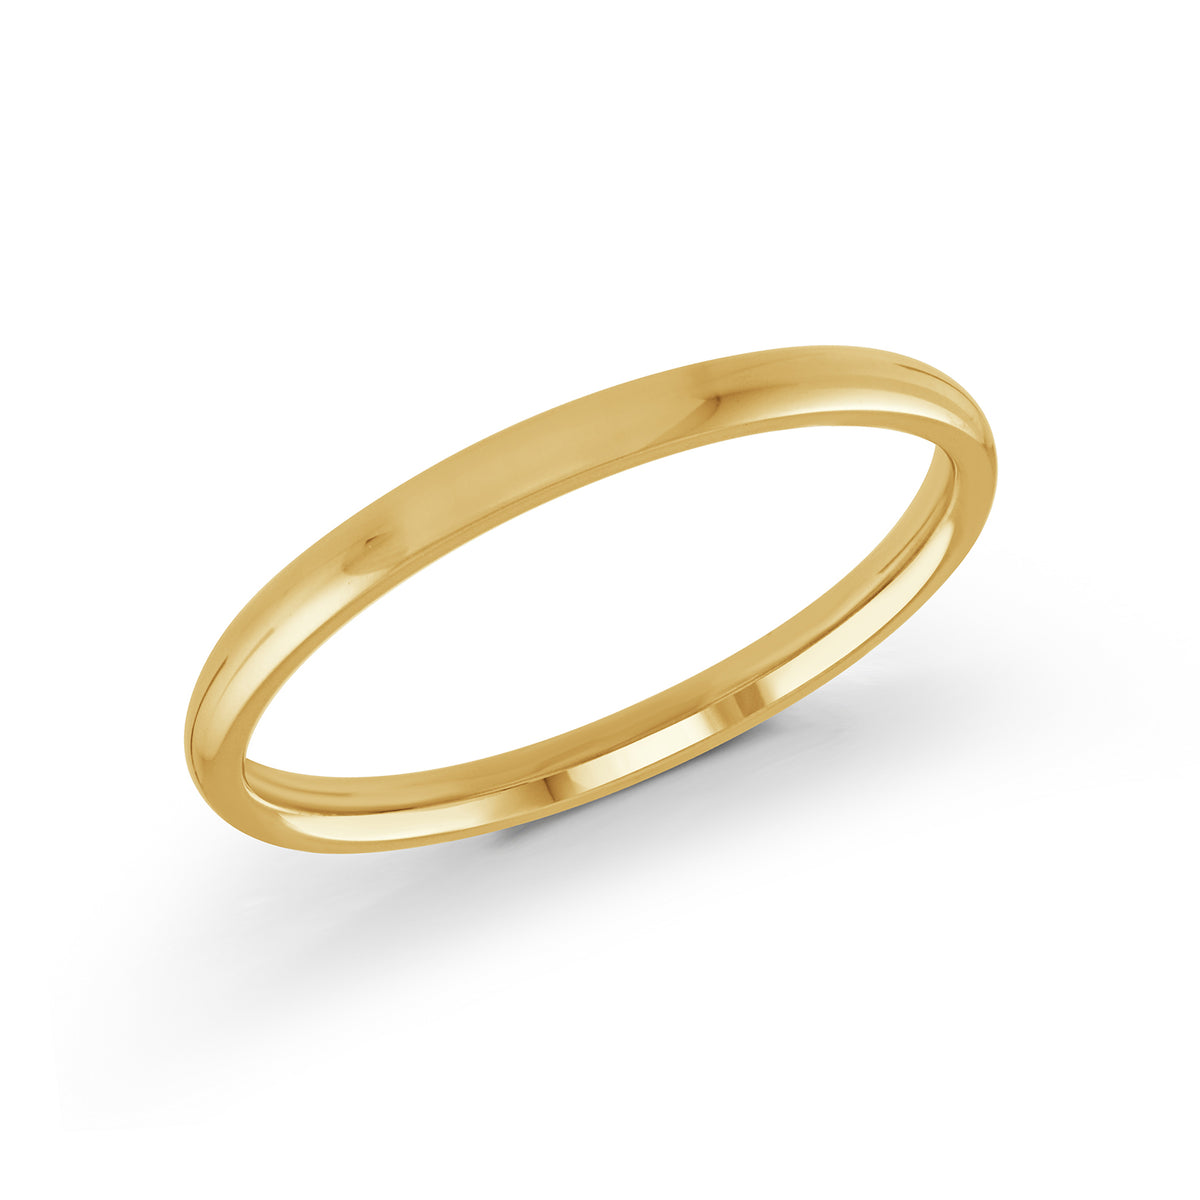 Solid Yellow Gold High-Polish Domed Wedding Band 2mm-3mm